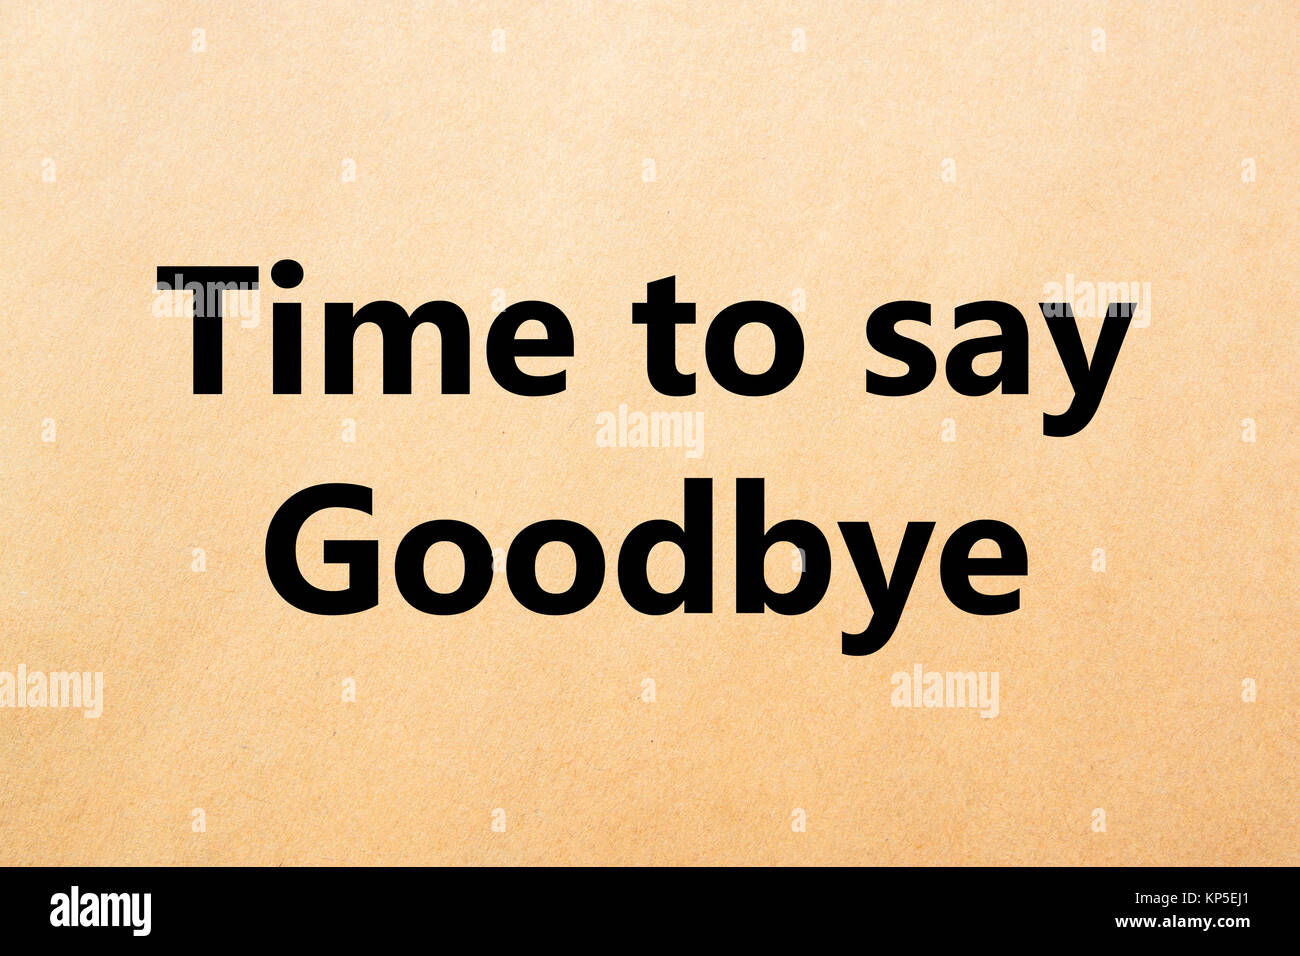 Time to Say Goodbye Message. Concept Image Stock Photo - Alamy